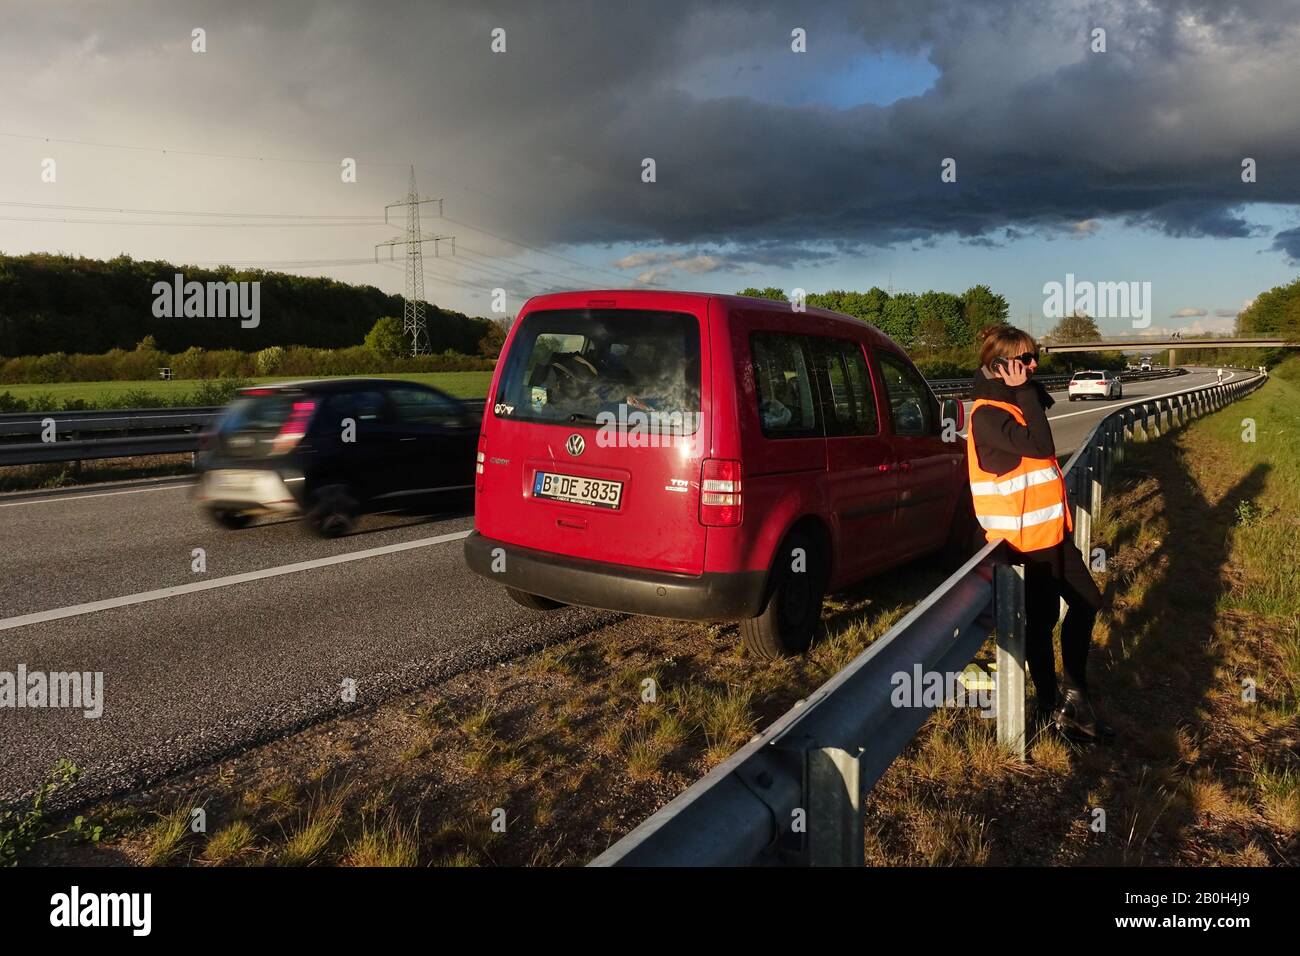 04.05.2019, Hamburg, Hamburg, Germany - Woman stands behind the crash barrier in a car breakdown on the A24 and makes a phone call. 00S190504D669CAROE Stock Photo